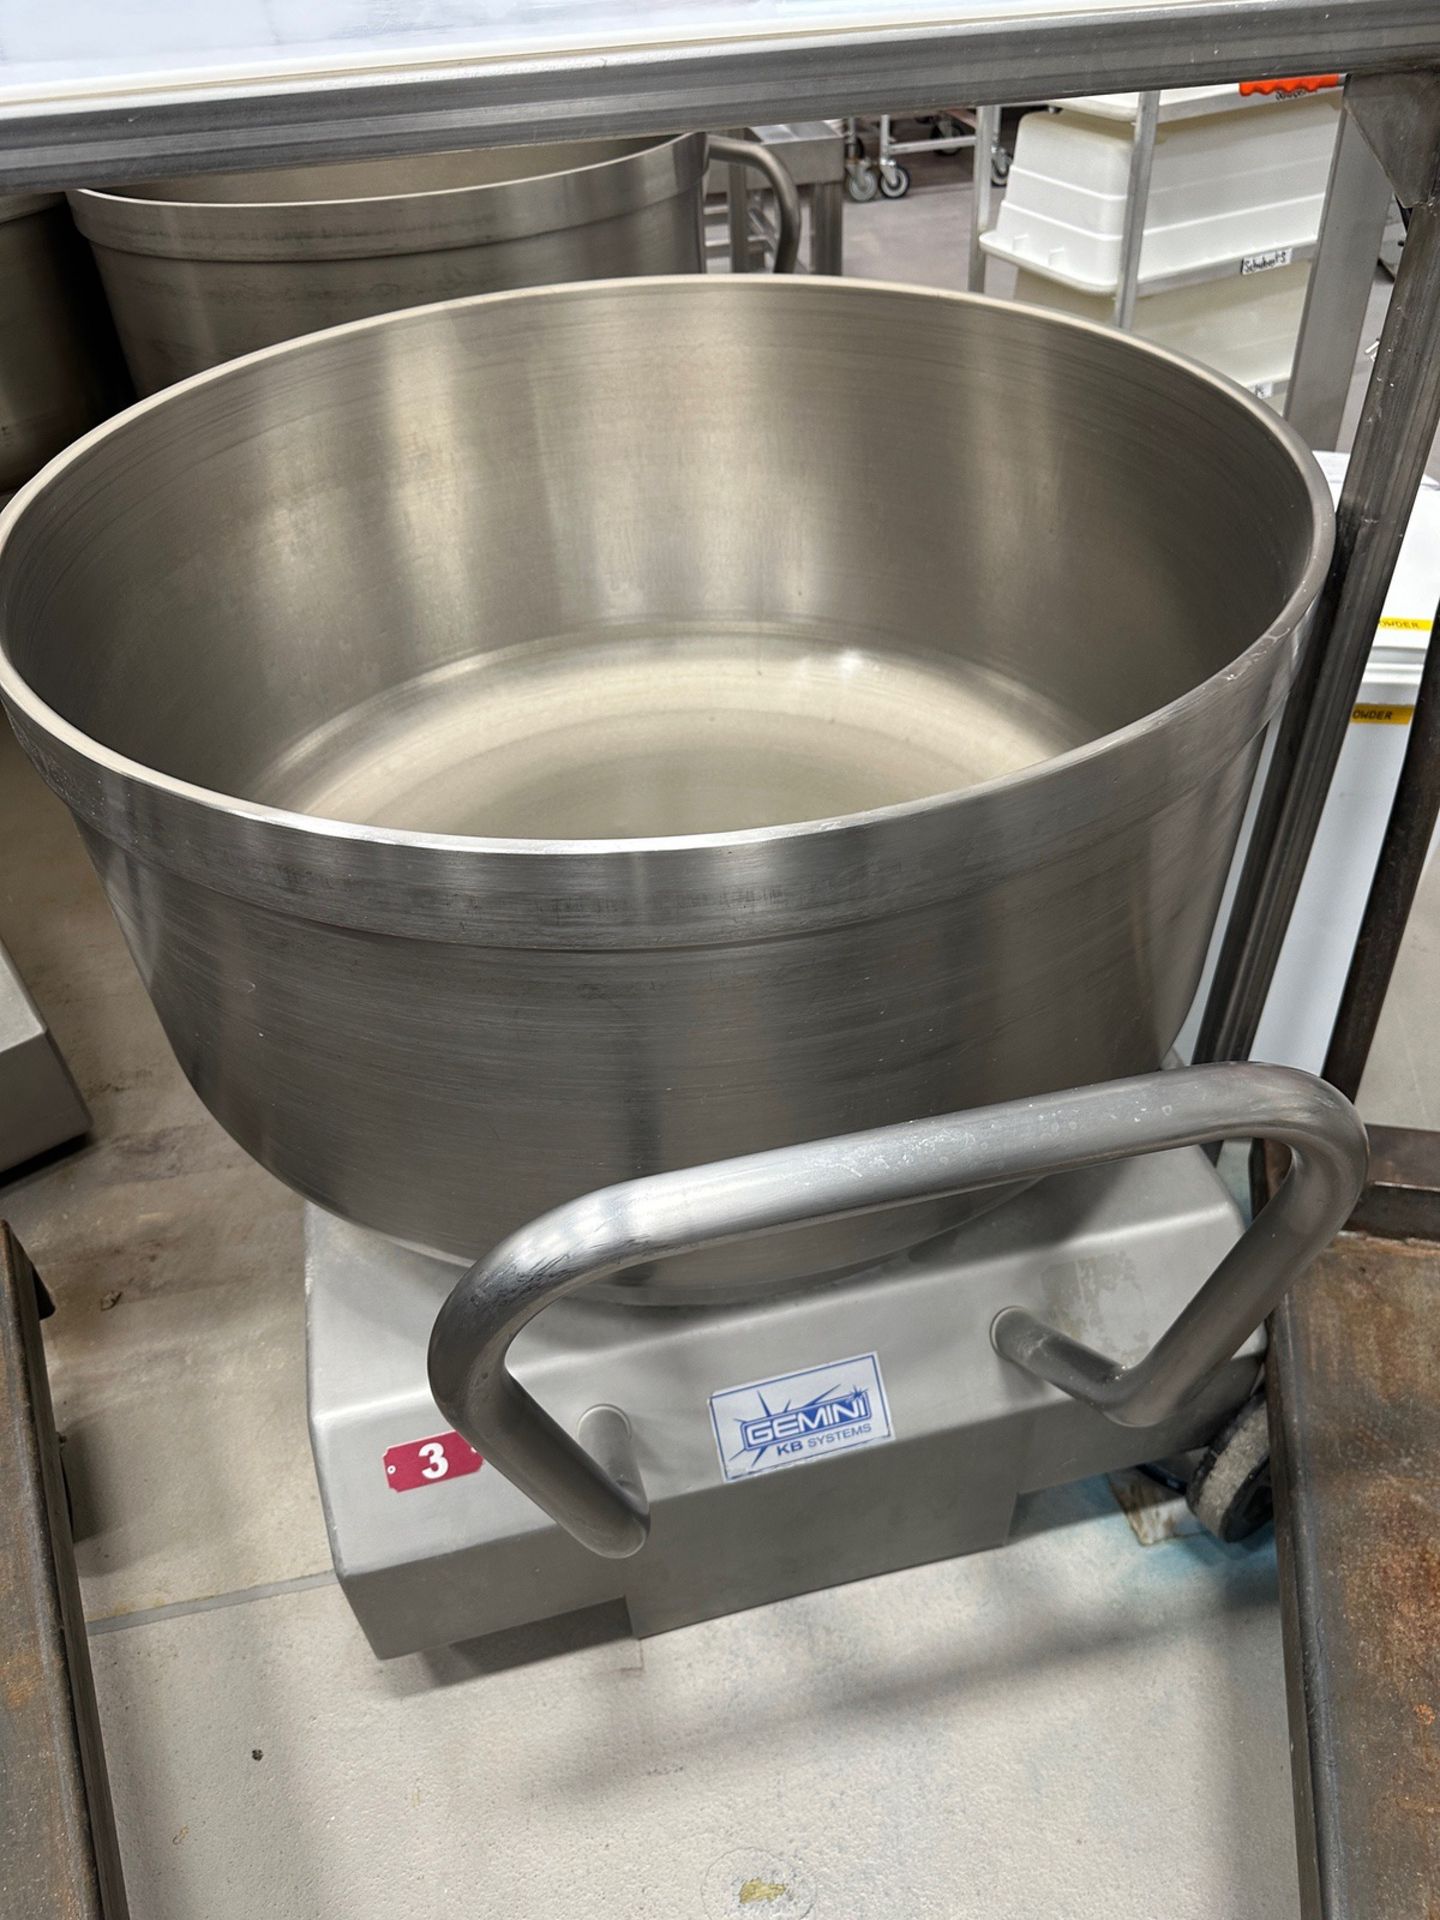 Lot of (2) Gemini 550 LB Capacity Stainless Steel Movable Bowls | Rig Fee $150 - Image 2 of 2